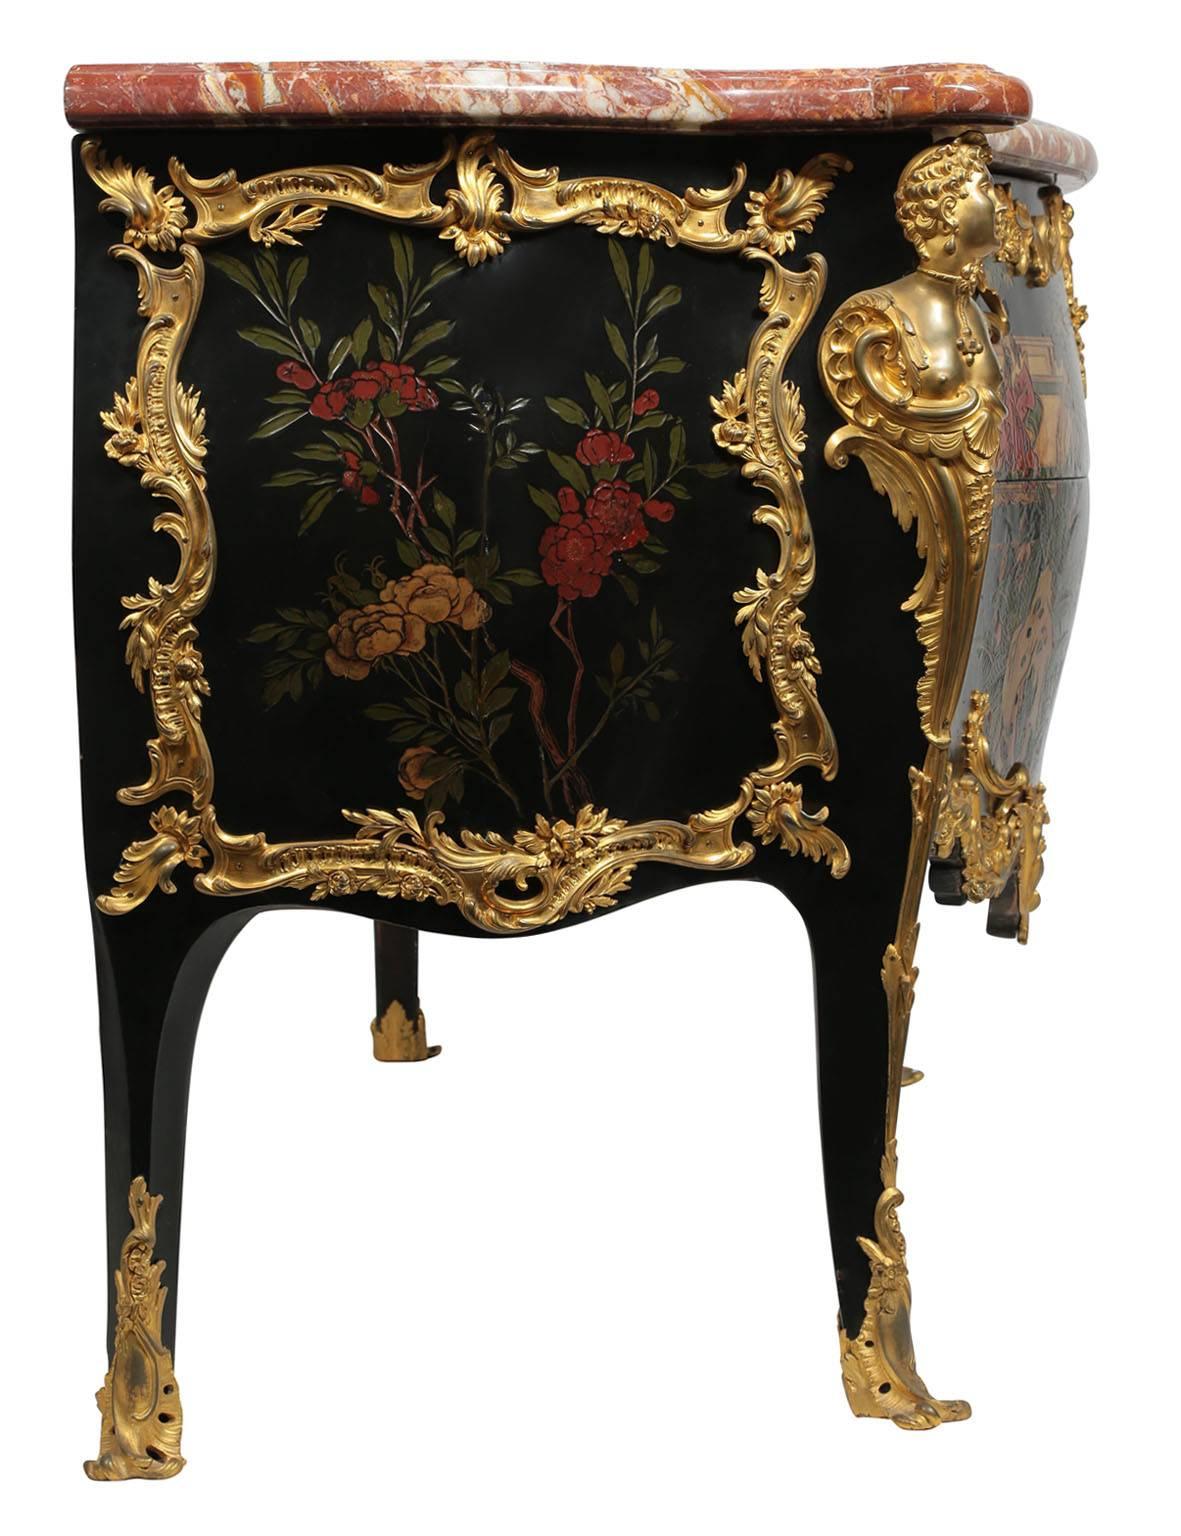 Palatial Louis XV Style 19th Century Gilt Bronze-Mounted Chinoiserie Commode For Sale 2